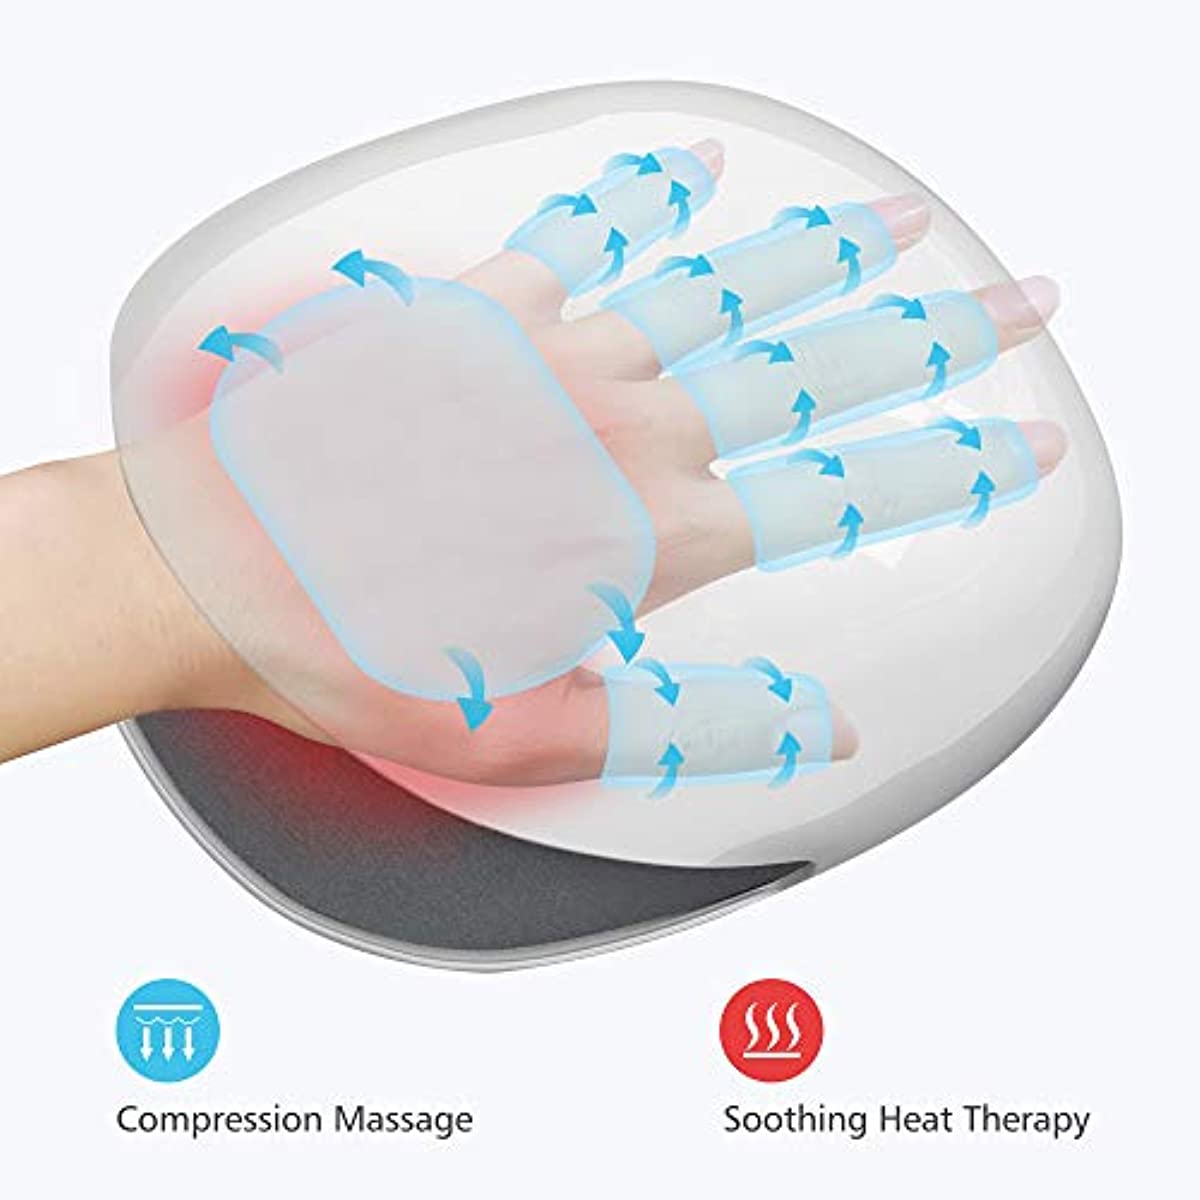 COMFIER Wireless Hand Massager with Heat -3 Levels Compression & Heating,Rechargeable Hand Massager Machine for Carpal Tunnel,Valentines Day Gifts for Women